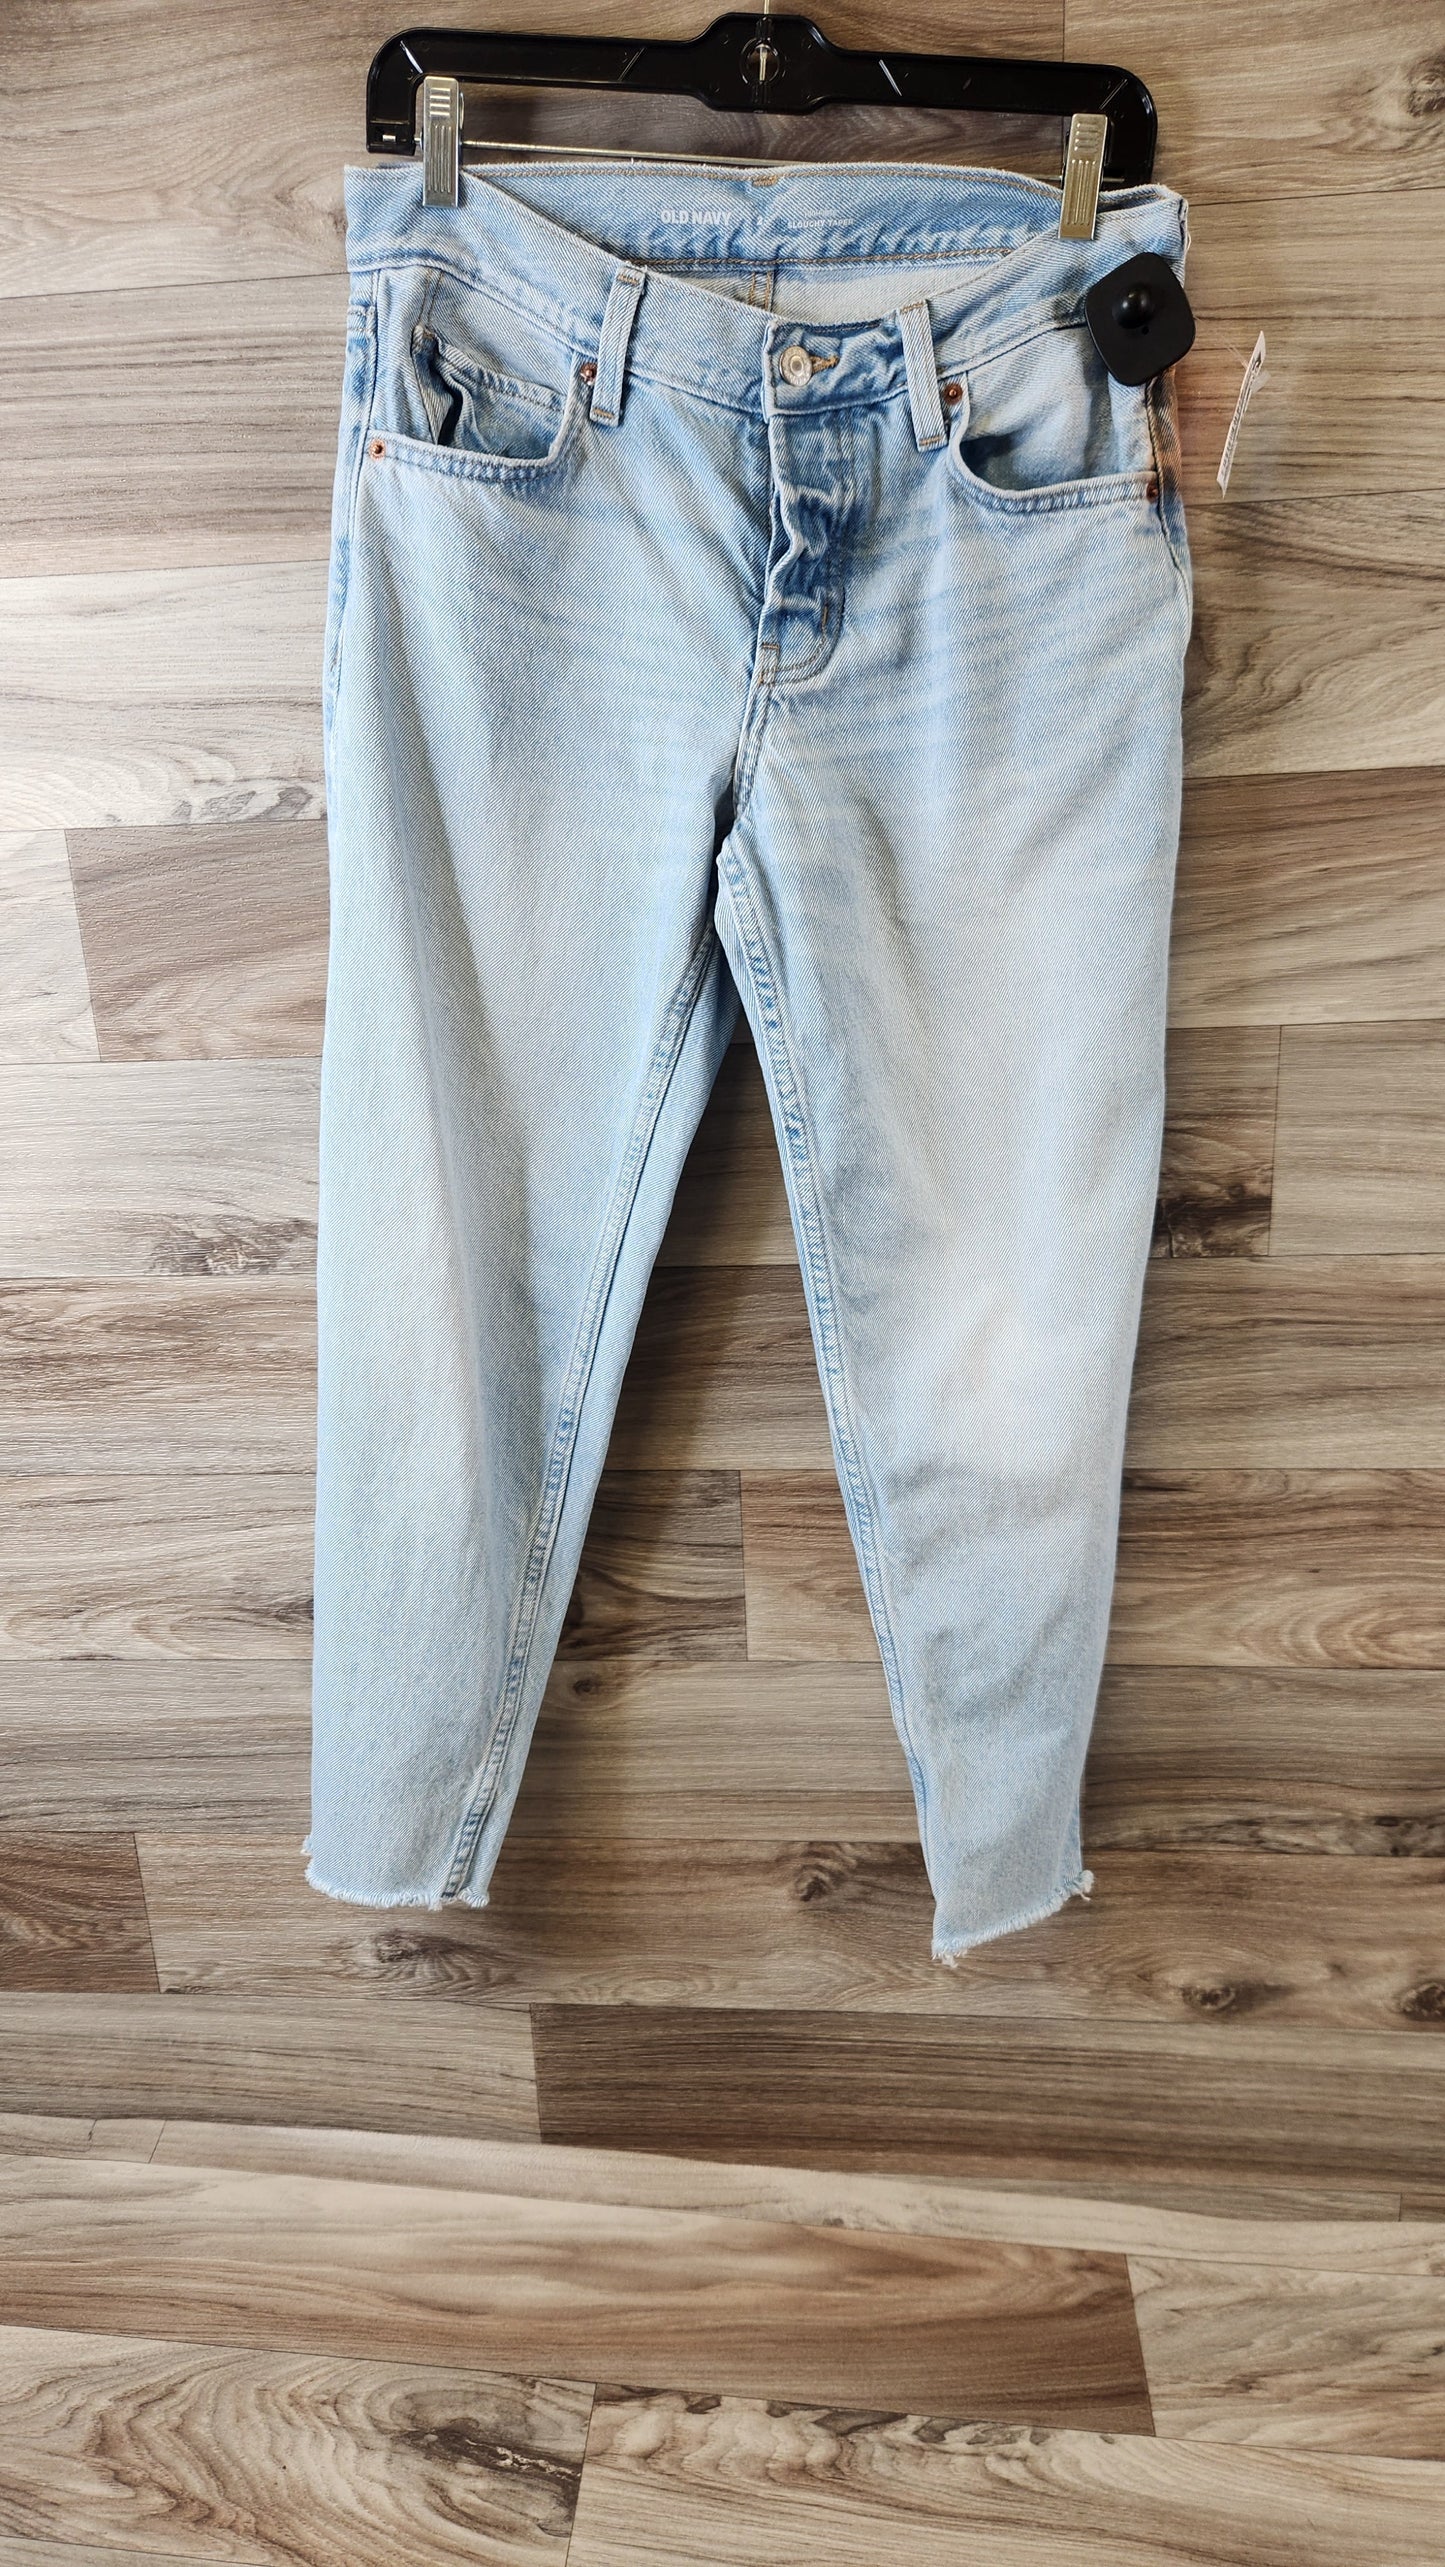 Jeans Relaxed/boyfriend By Old Navy  Size: 2